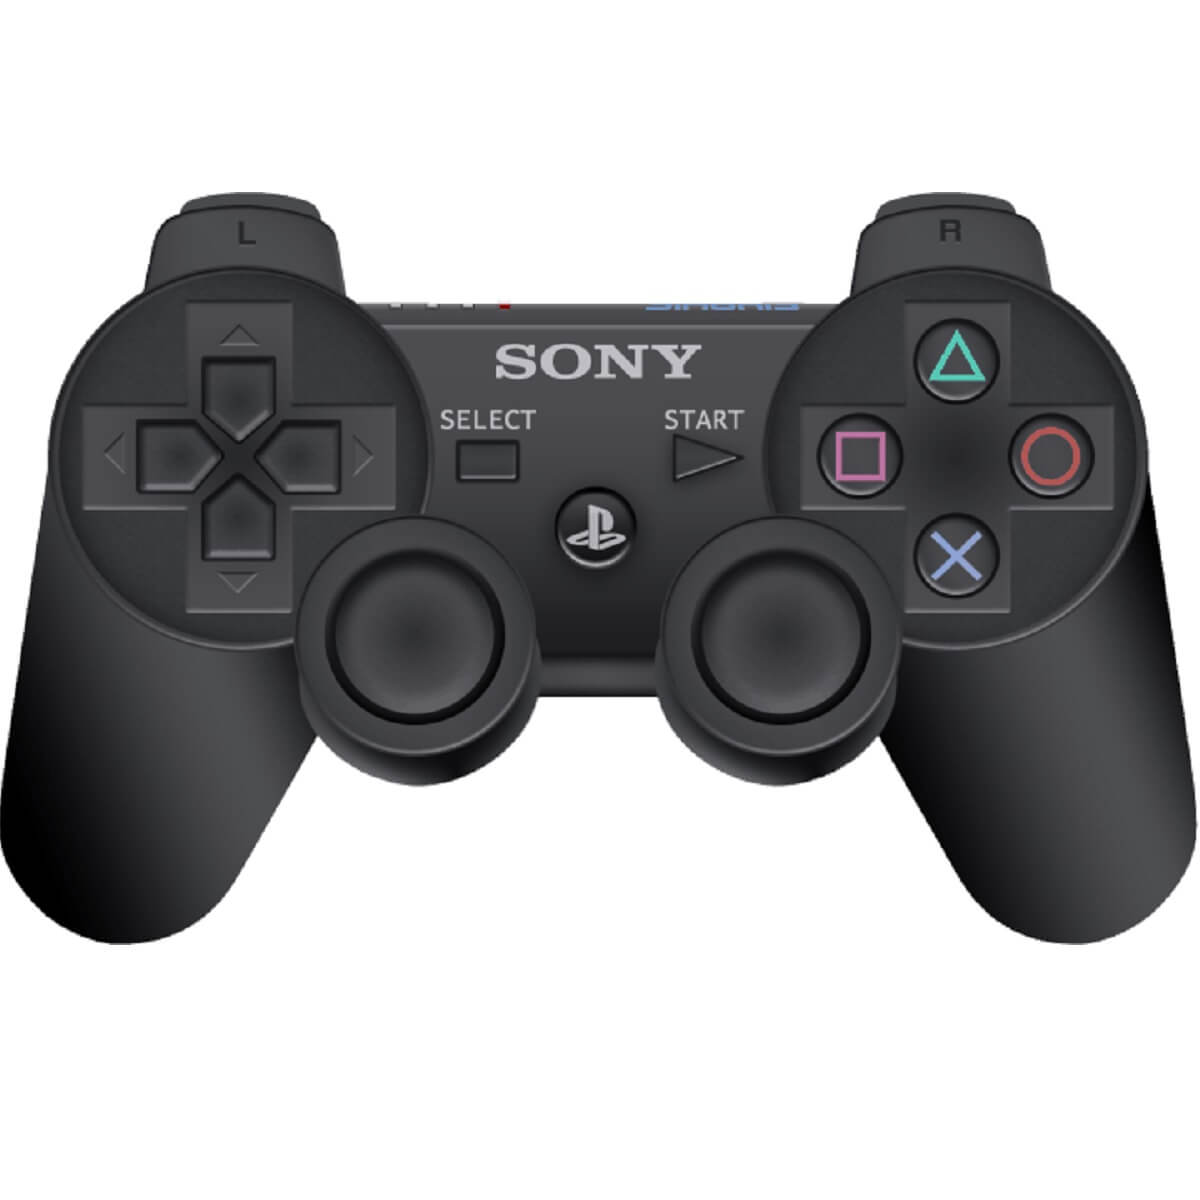 Discover Quickly How To Use A Playstation 3 Controller With Windows 10